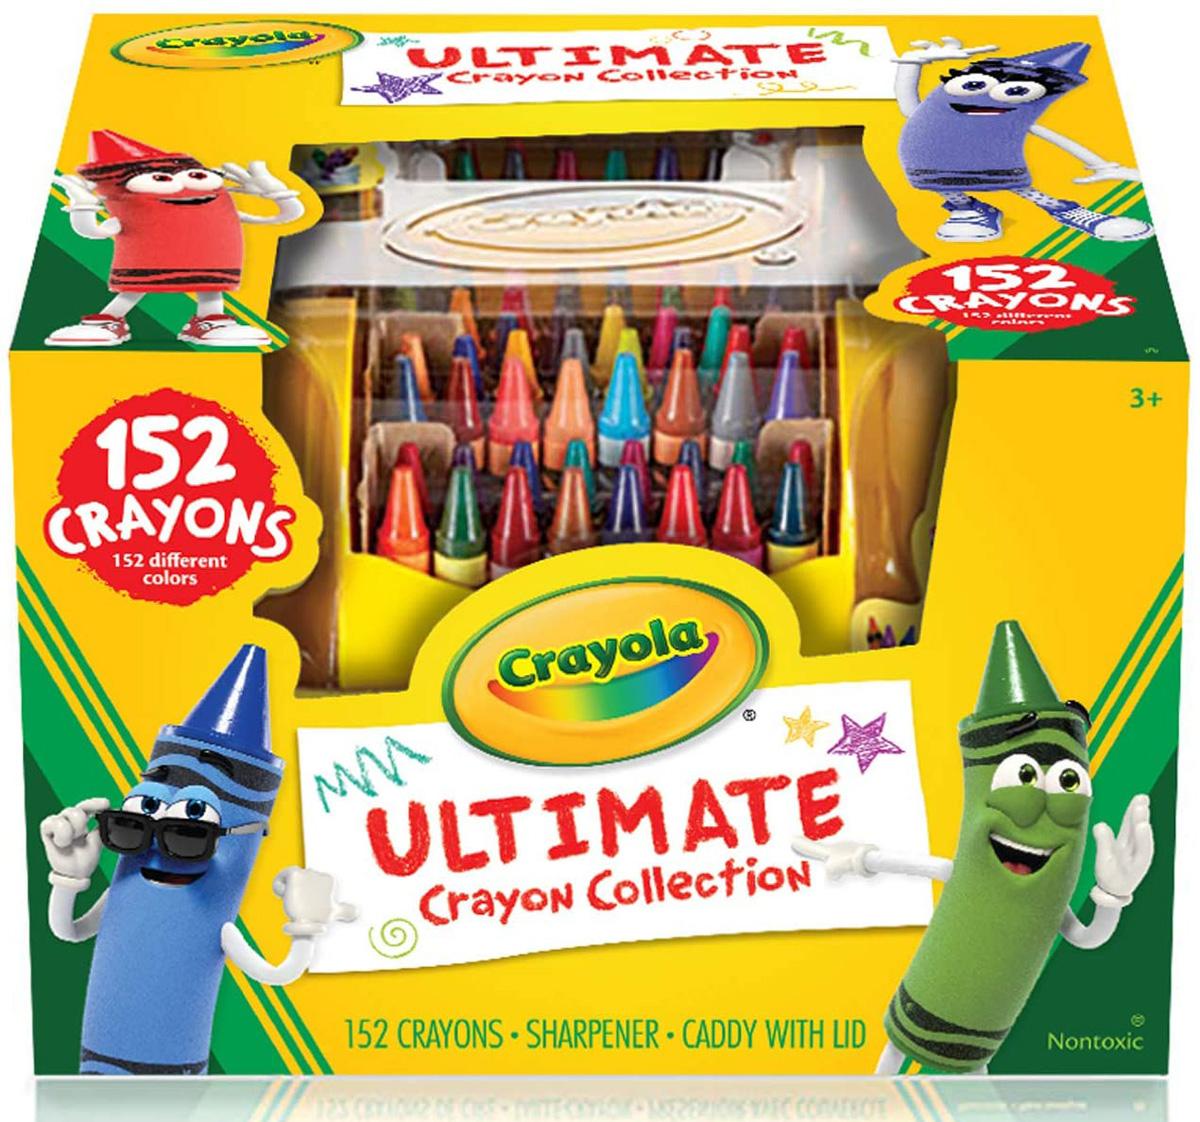 152 Crayola Ultimate Crayon Collection Coloring Set for $7.99